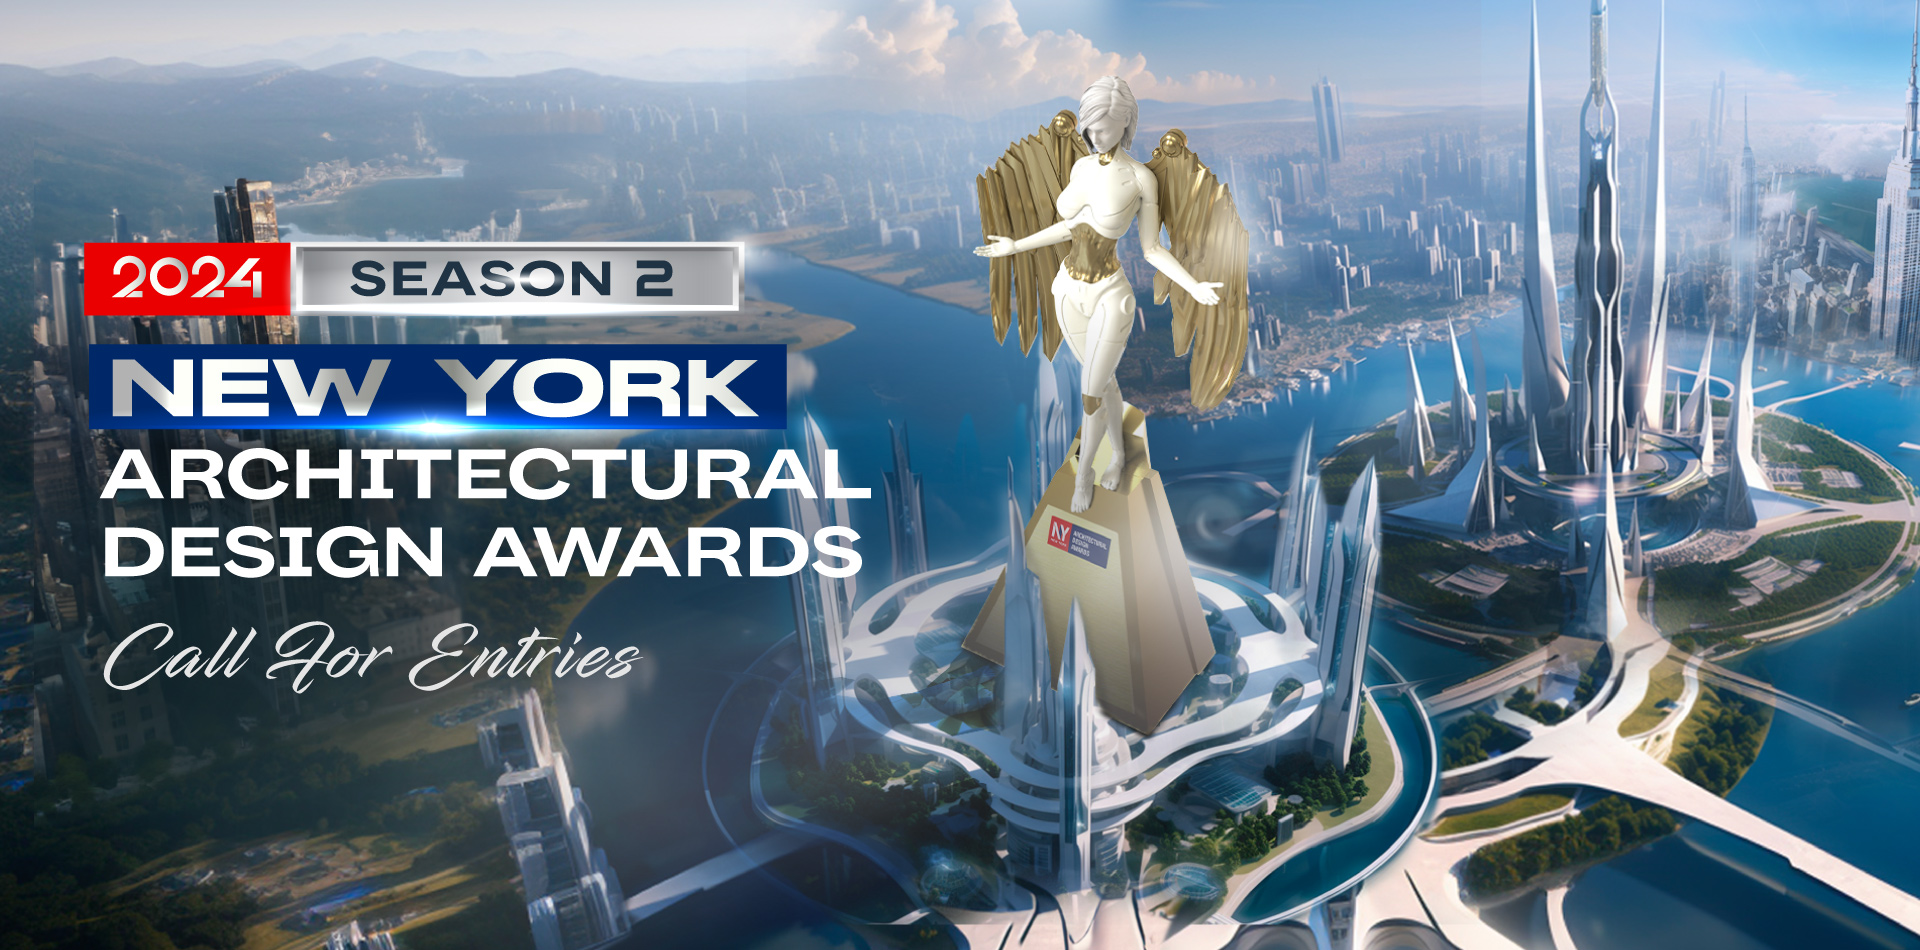 2024 S2 NY Architectural Design Awards Call for Entries